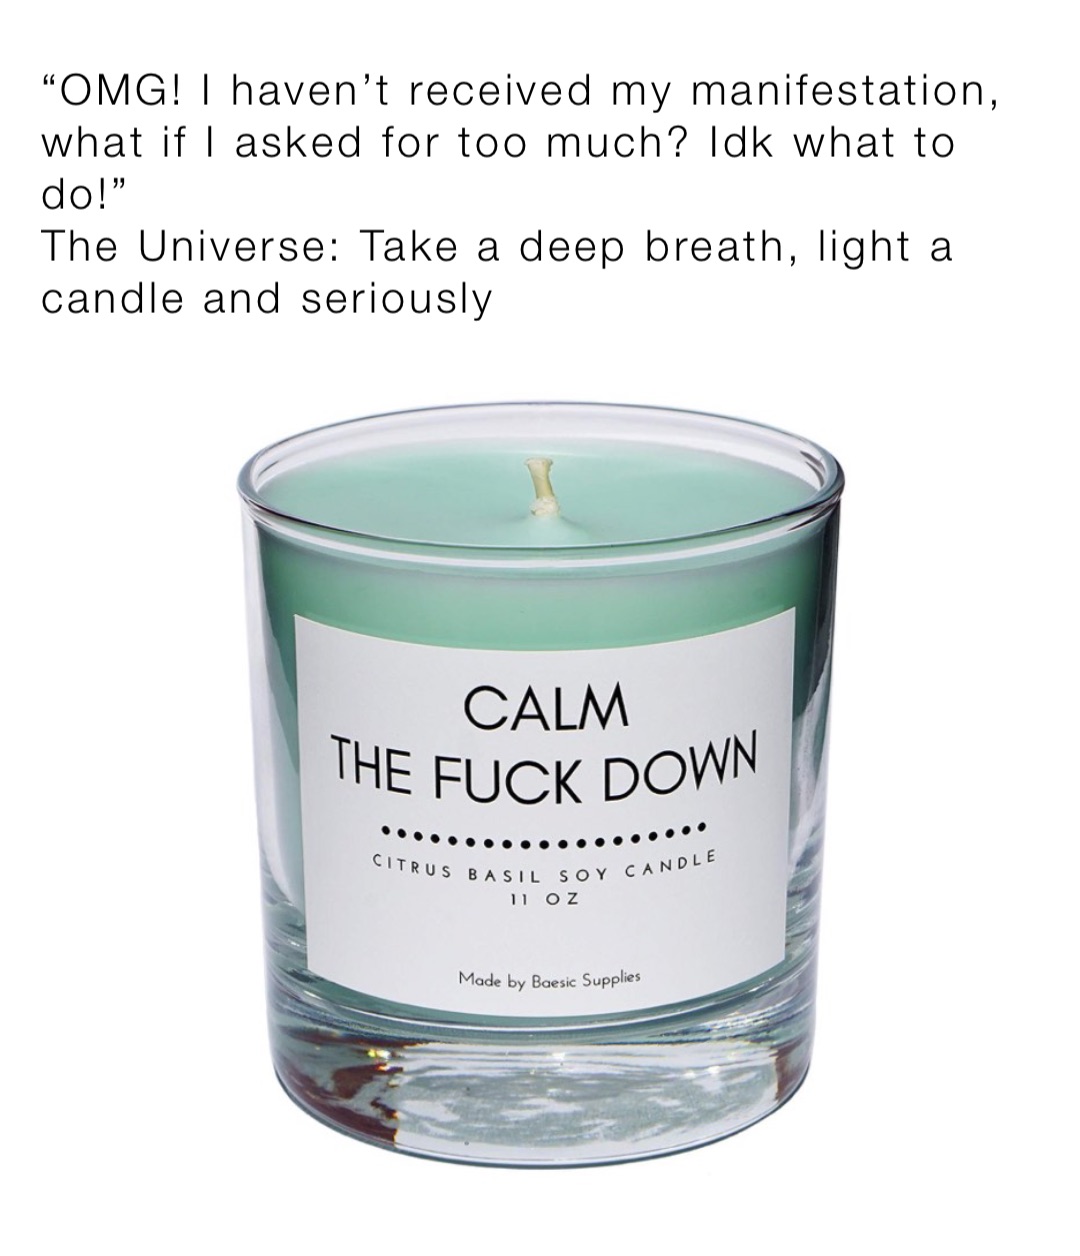 “OMG! I haven’t received my manifestation, what if I asked for too much? Idk what to do!”
The Universe: Take a deep breath, light a candle and seriously